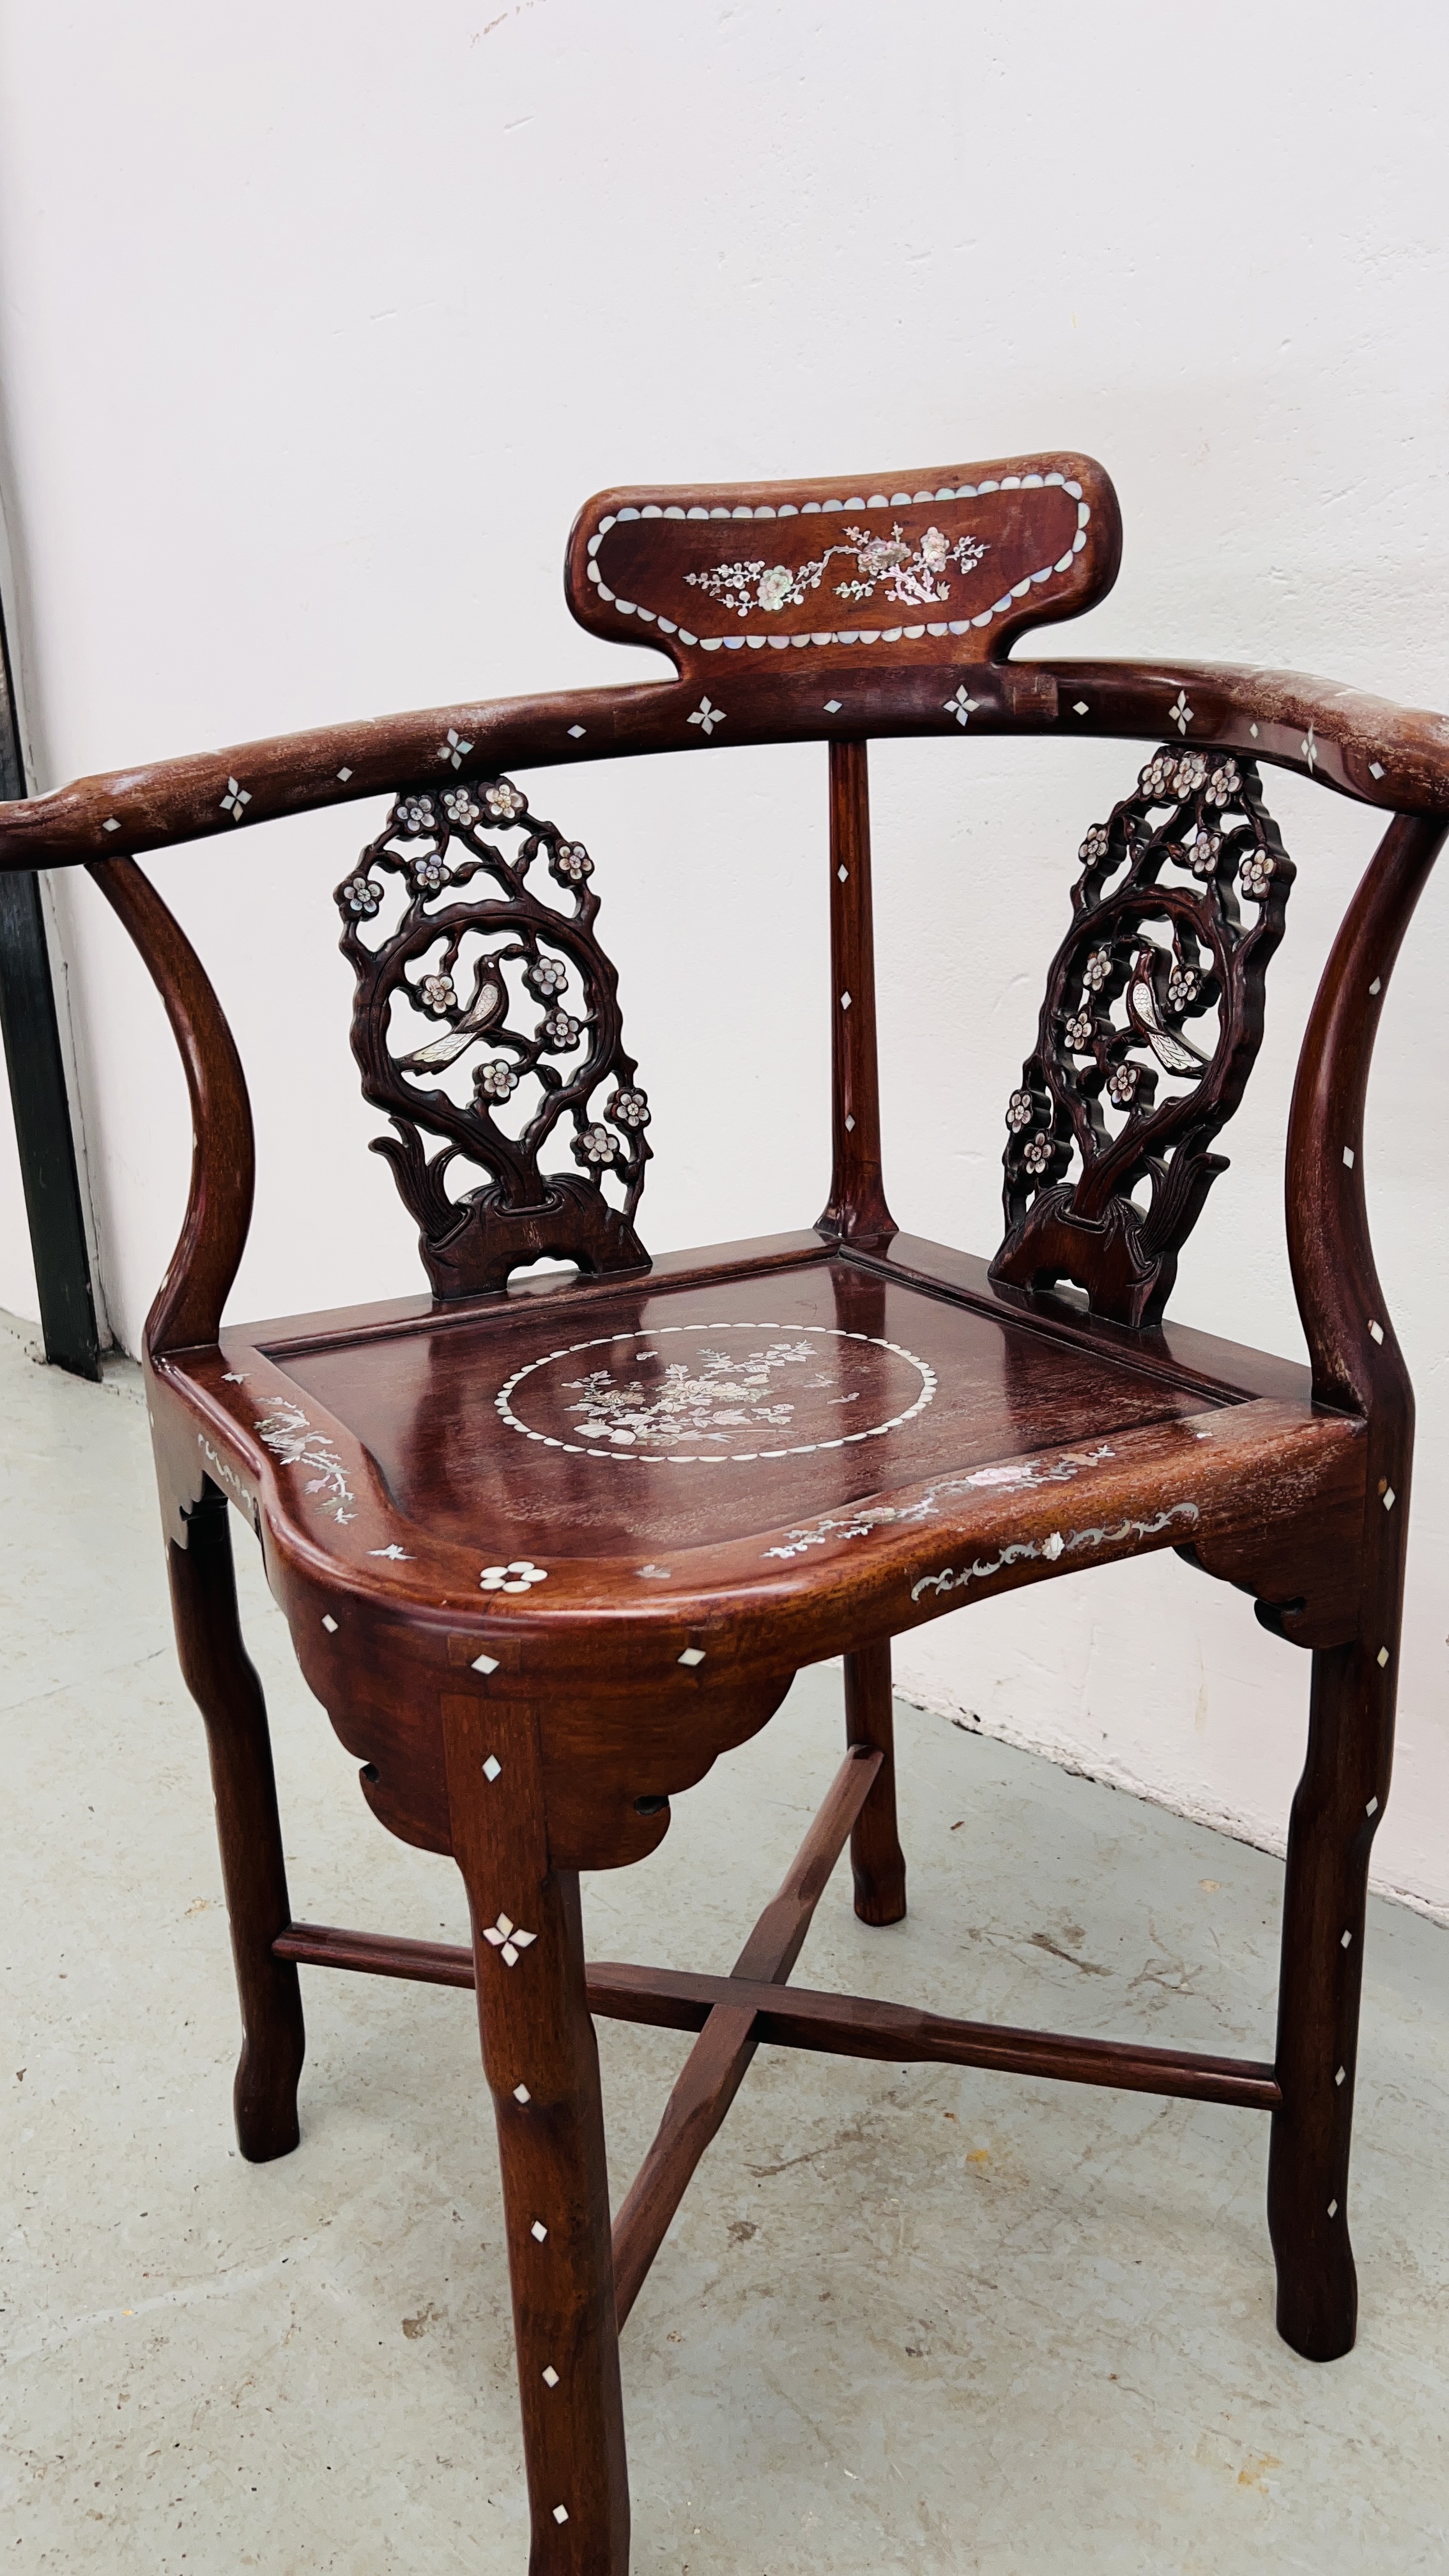 A PAIR OF ORIENTAL HARDWOOD AND MOTHER OF PEARL INLAID CORNER CHAIRS. - Image 9 of 14